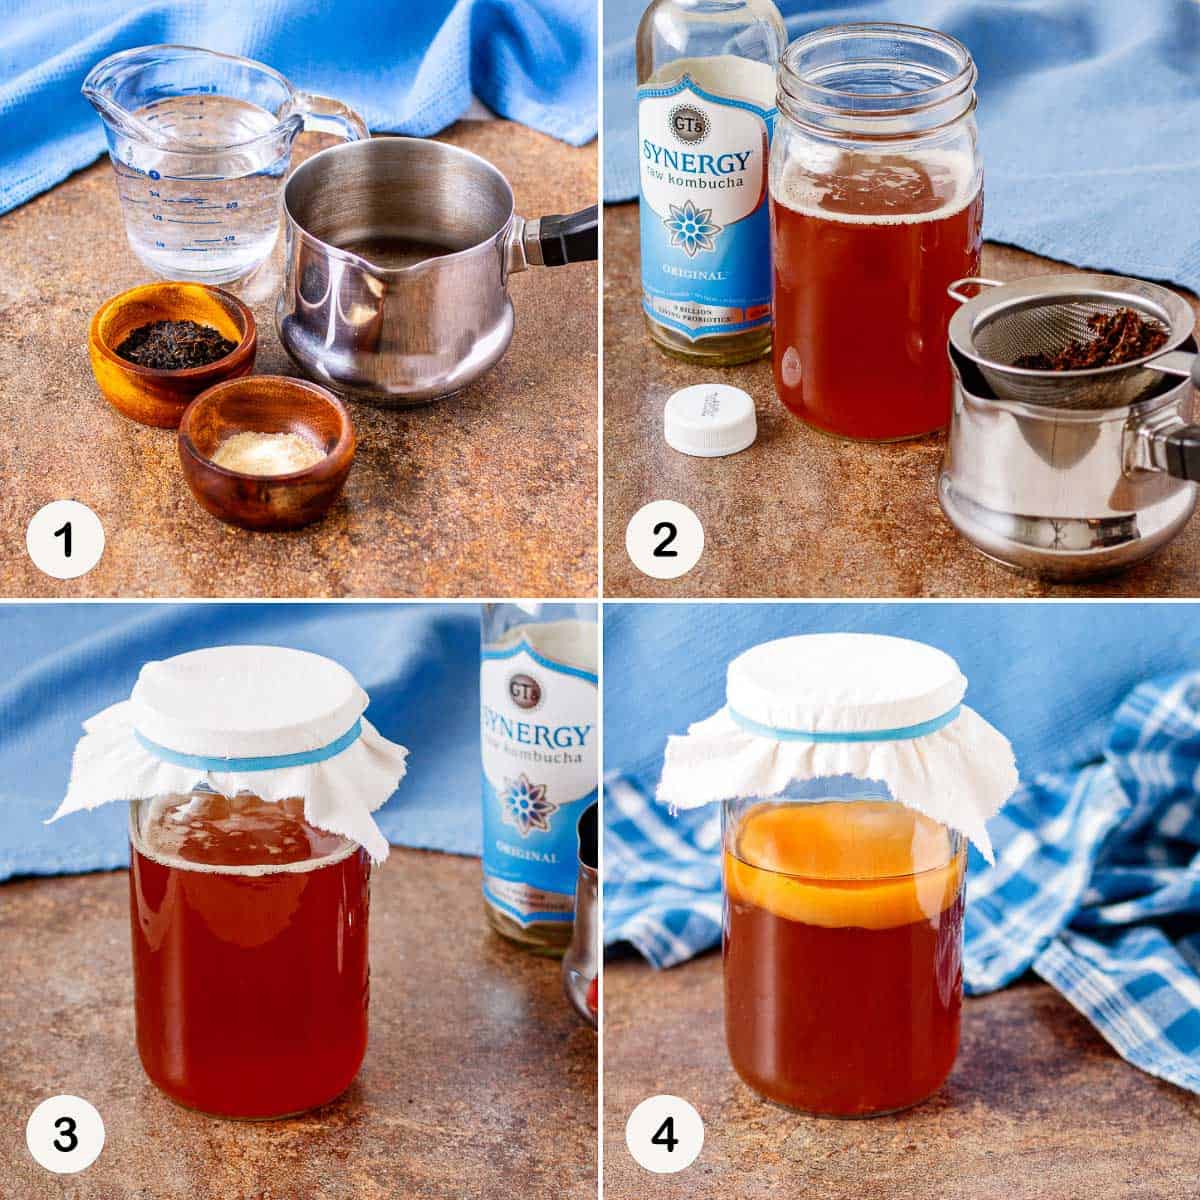 Make sweetened tea, add kombucha and let ferment to grow a scoby.